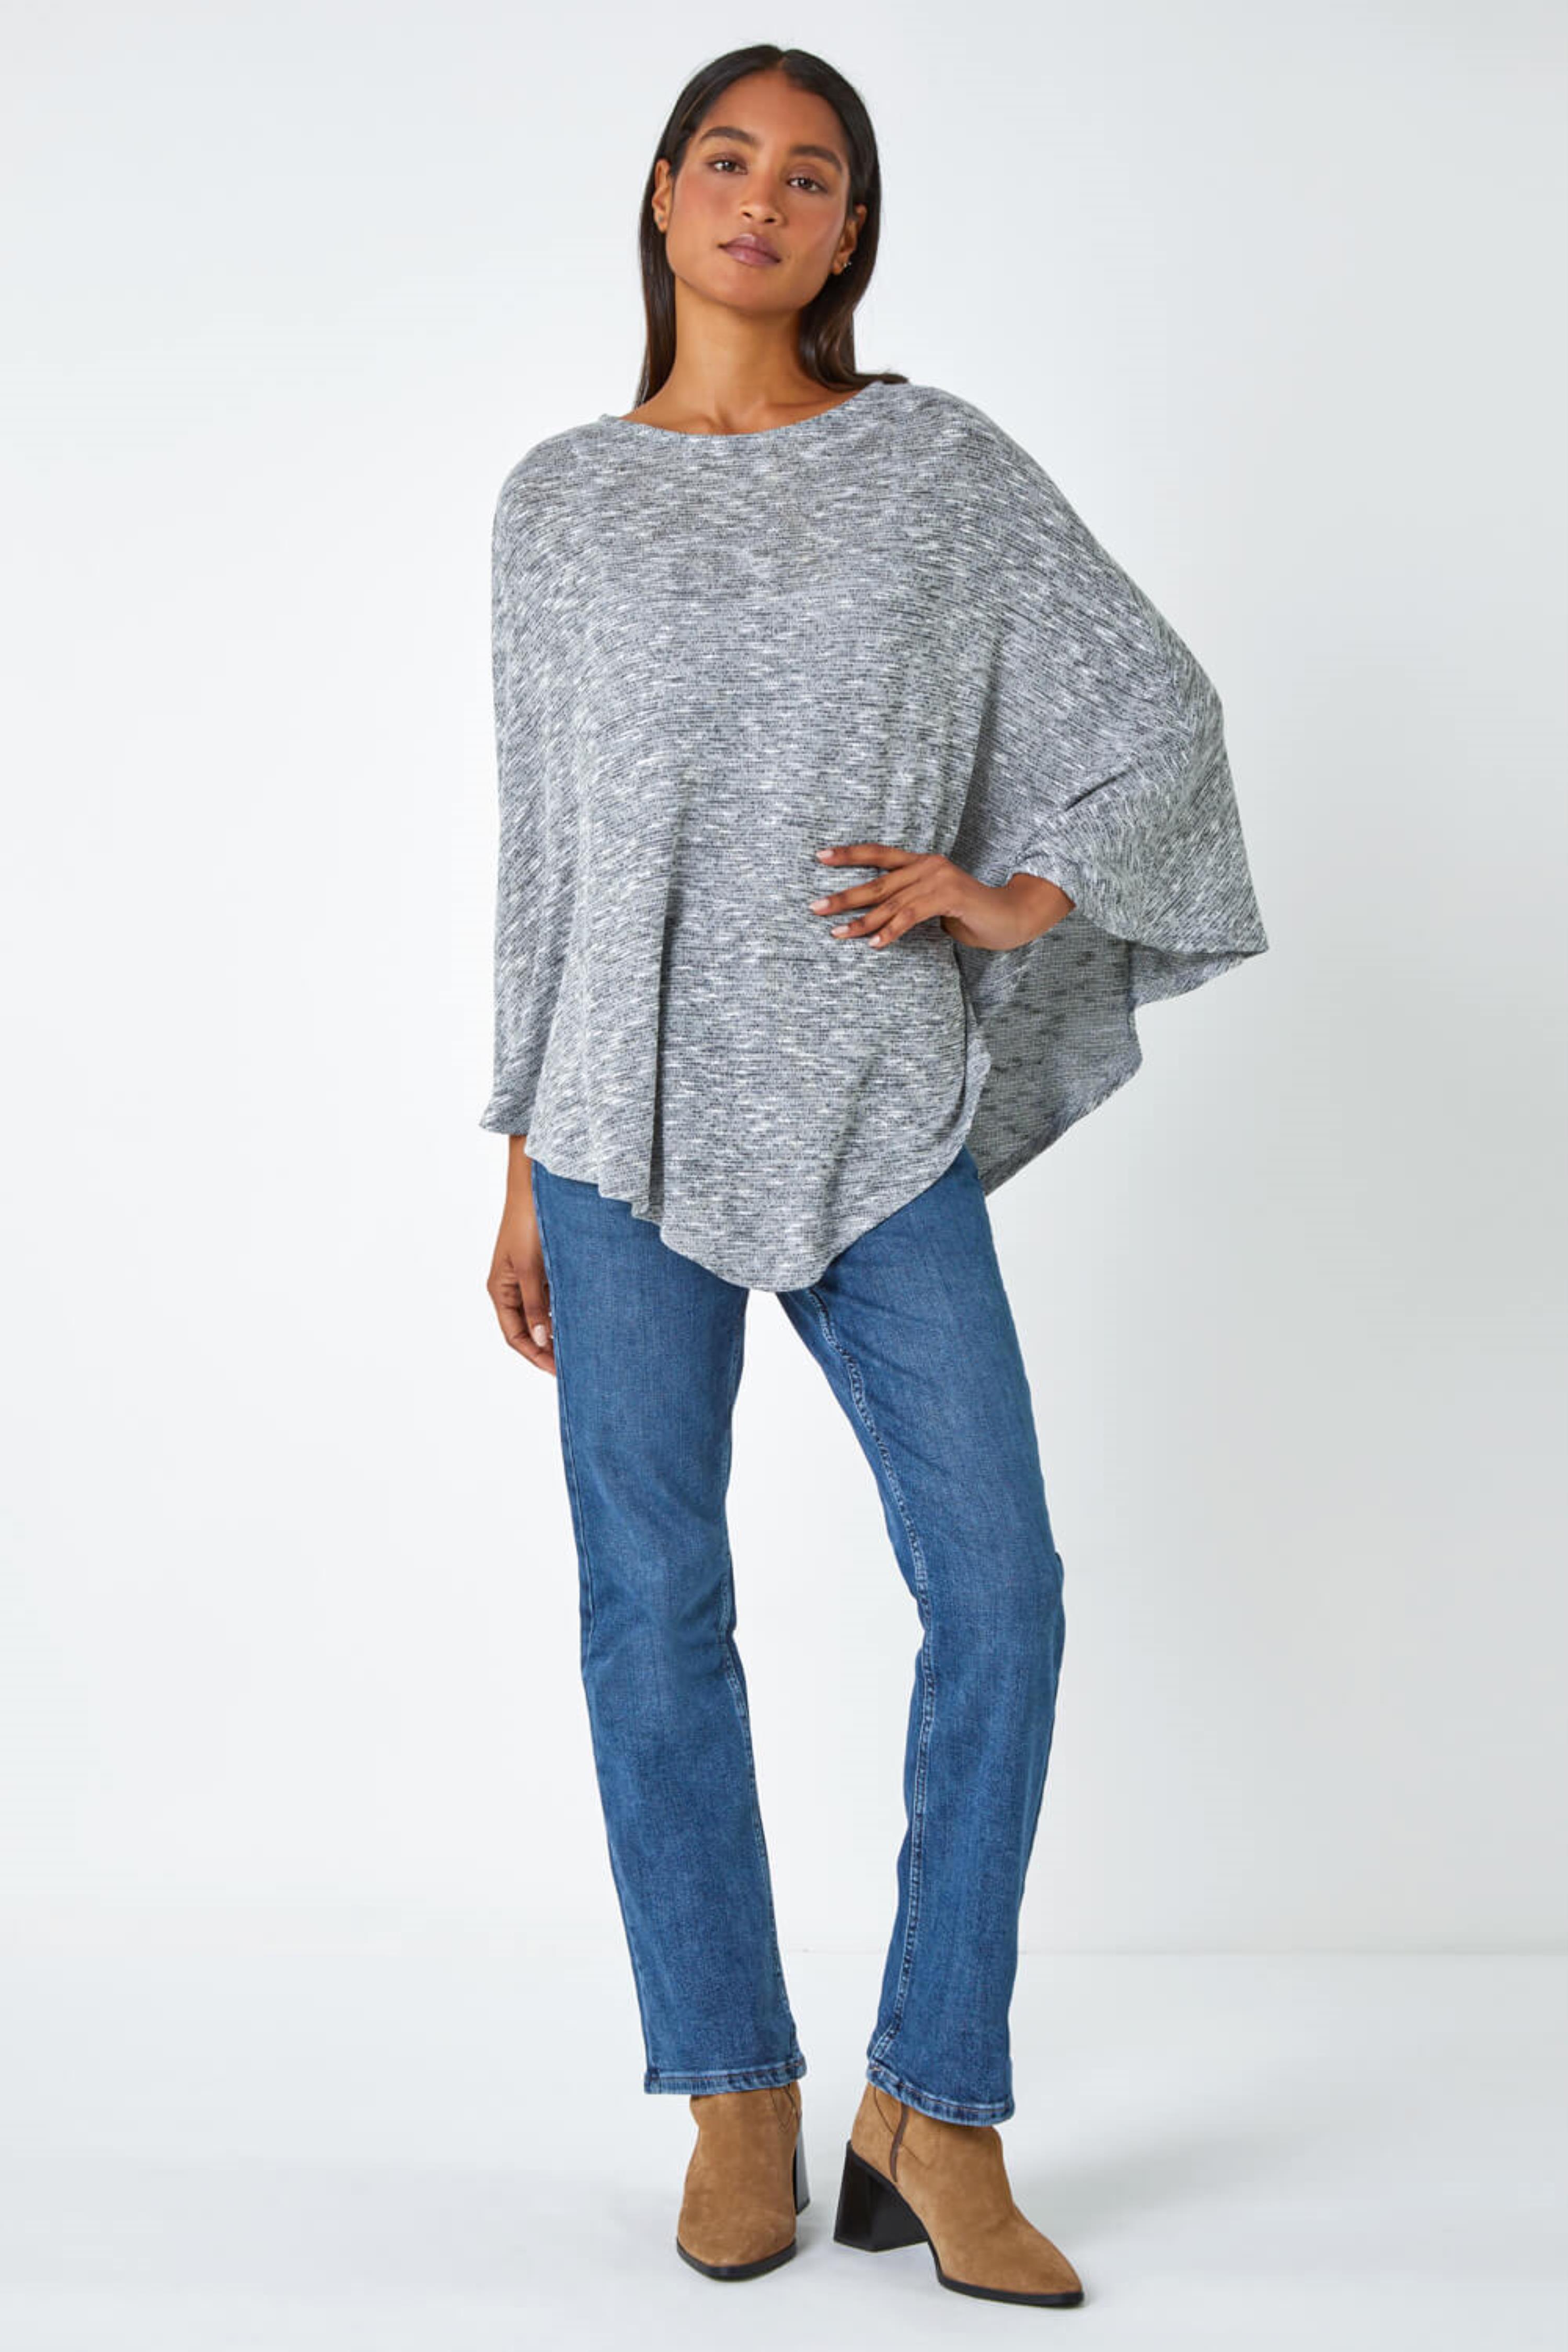 Grey Marl Stretch Knit Jersey Top, Image 2 of 5